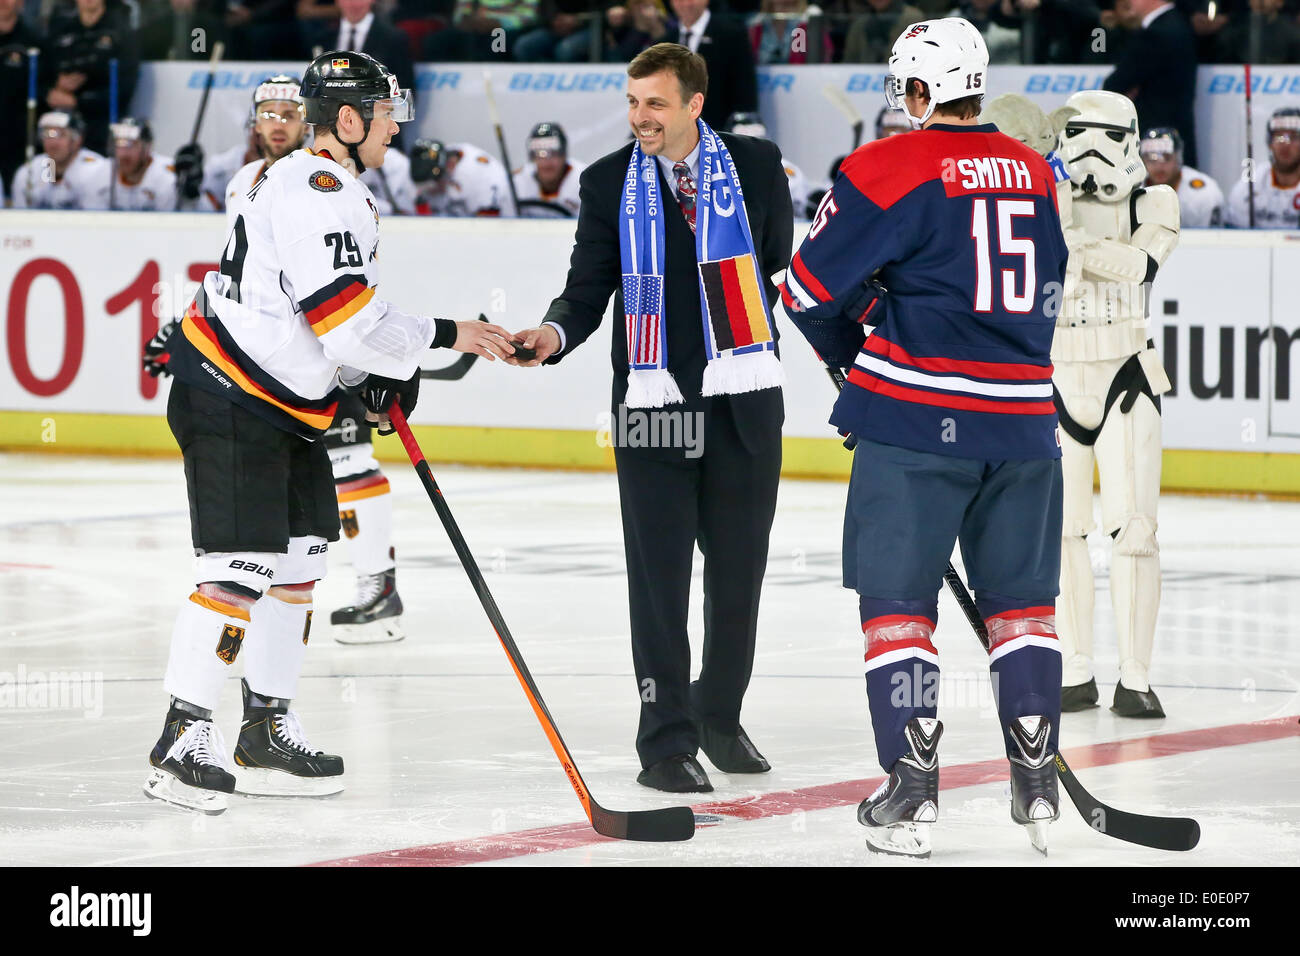 Nuremberg, Germany. 06th May, 2014. American consul general in Munich Bill Moeller (2-L) holds the puck next to Germany's Alexander Barta (L) and USA's Craig Smith during the world ice hockey championship preparation match between Germany and the USA at Arena Nuernberg in Nuremberg, Germany, 06 May 2014. A storm trooper from Star Wars stands to the right with a Yoda figure on its arm. Photo: Daniel Karmann/dpa/Alamy Live News Stock Photo